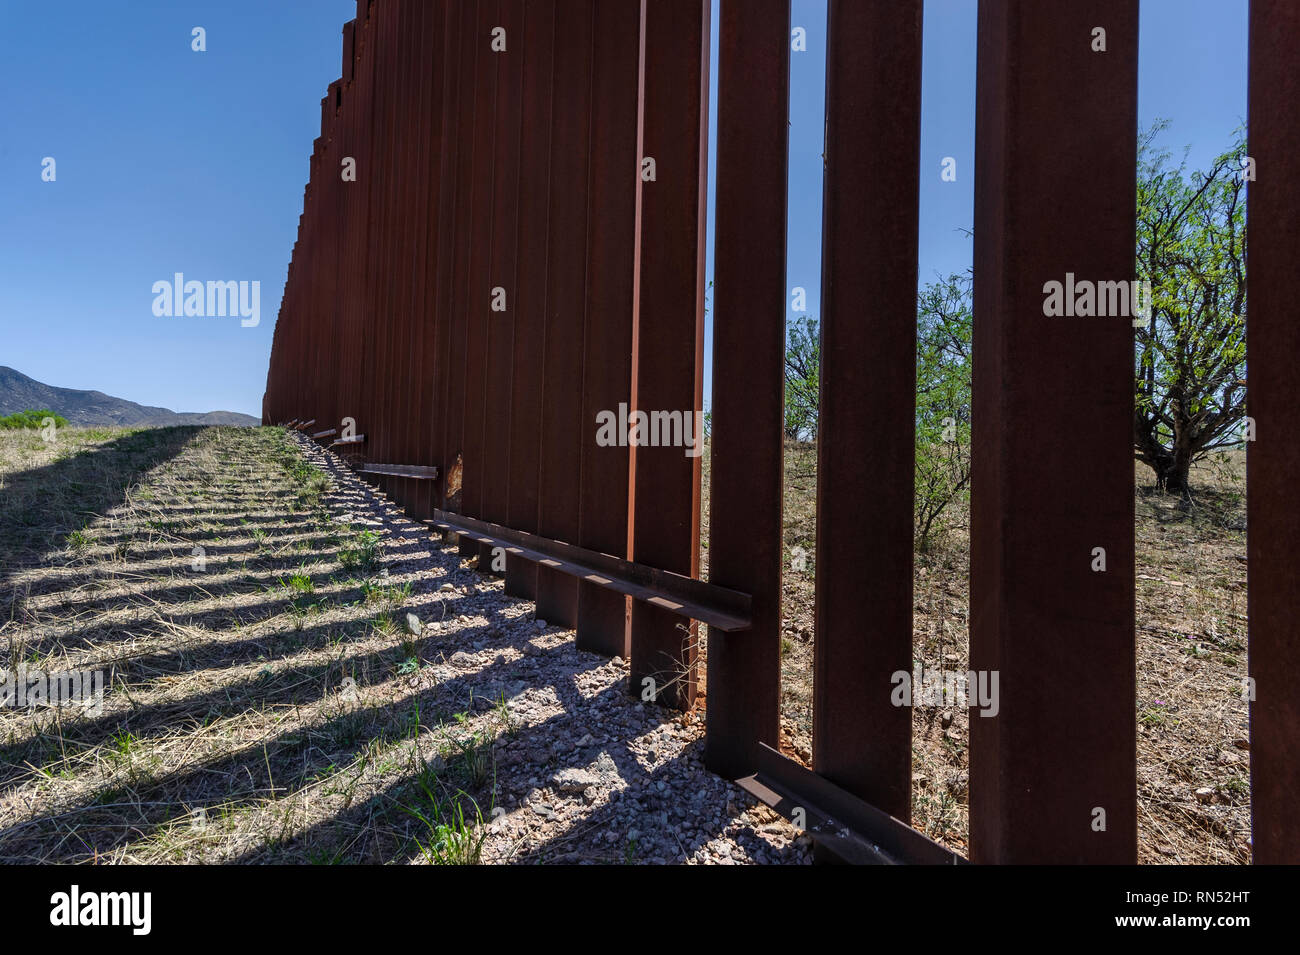 US border fence on Mexico boundary, tall bollard style pedestrian barrier, viewed from US side, east of Nogales Arizona, April 2018 Stock Photo